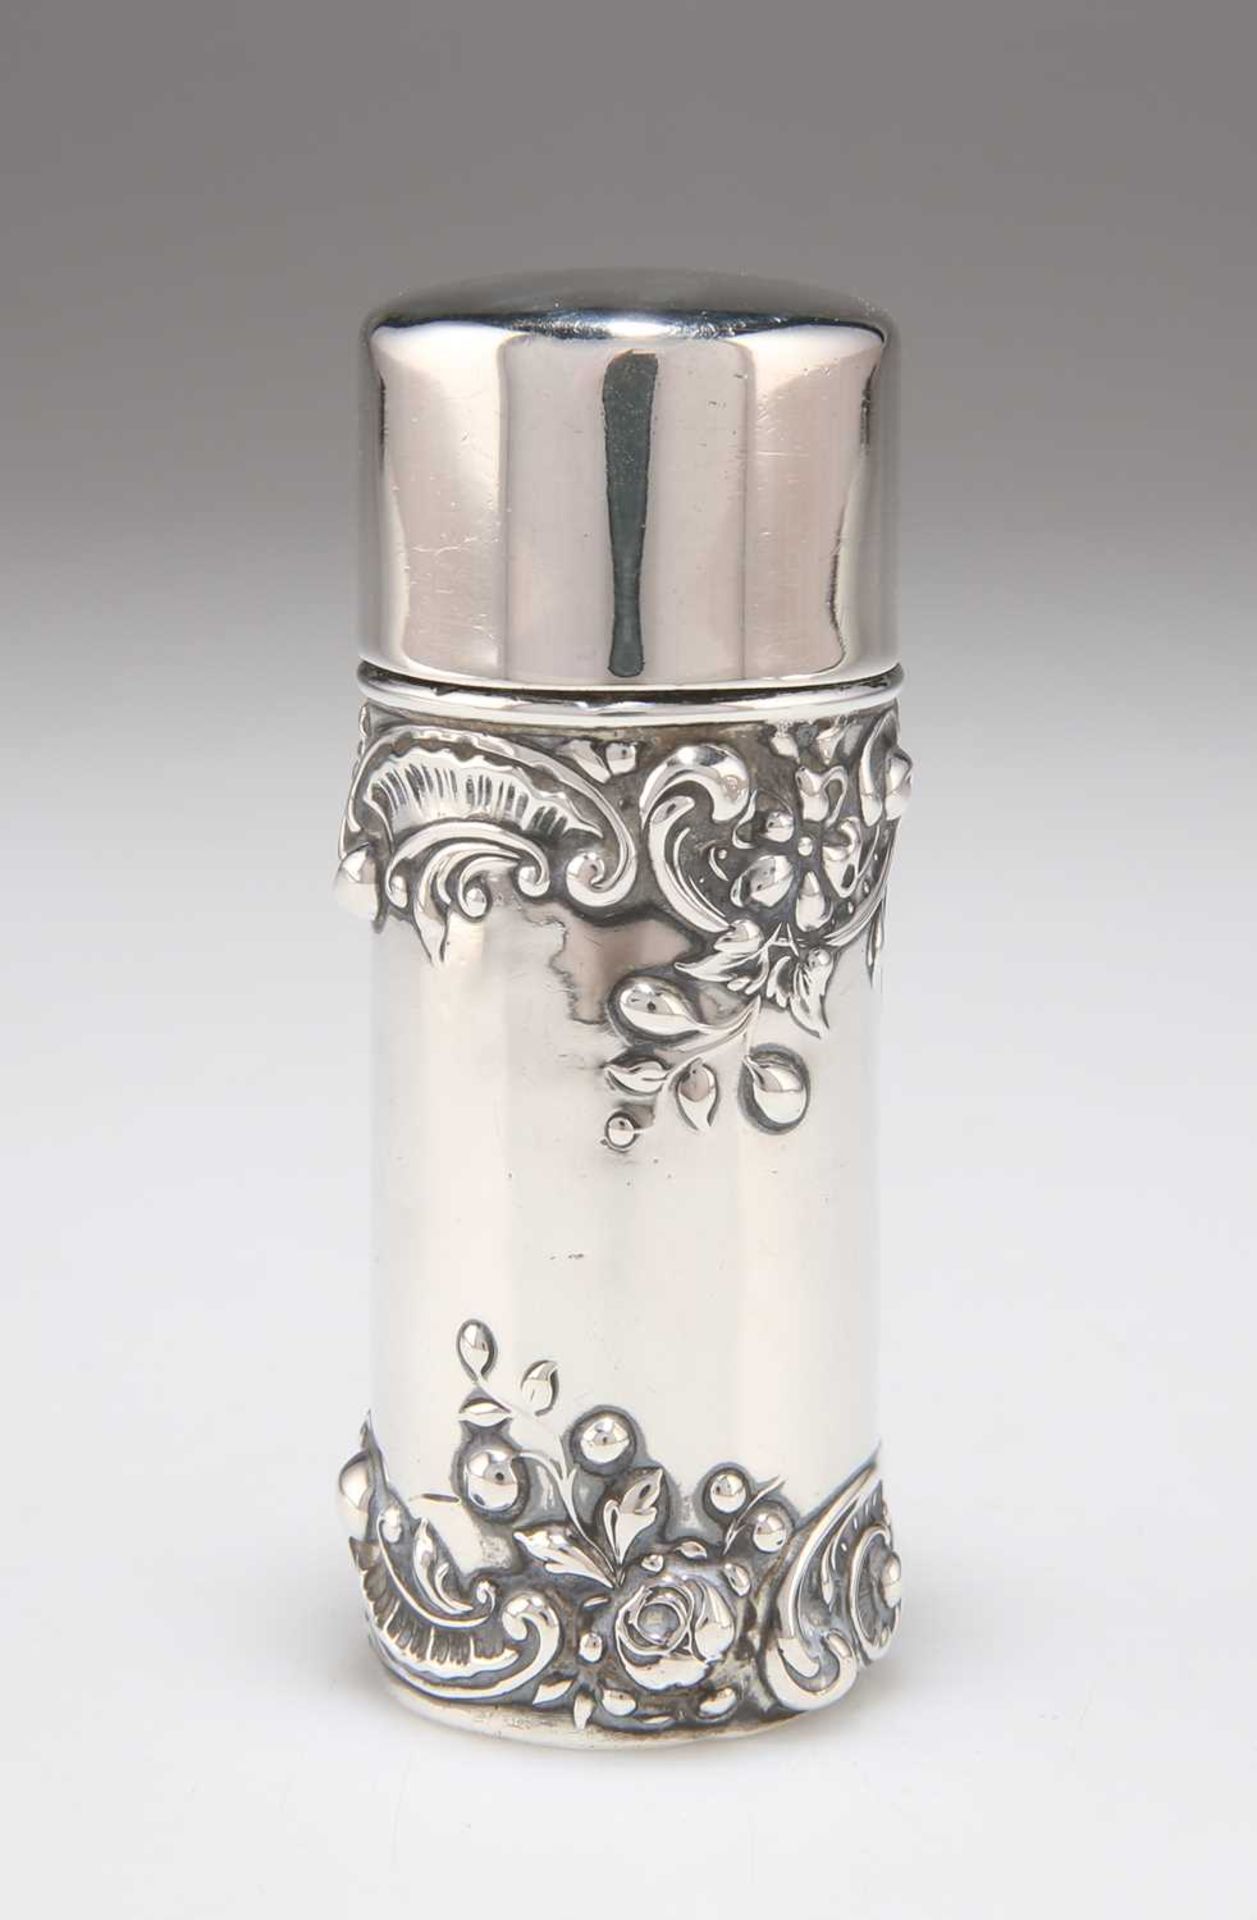 AN ART NOUVEAU AMERICAN STERLING SILVER JAR AND COVER, LATE 19TH CENTURY